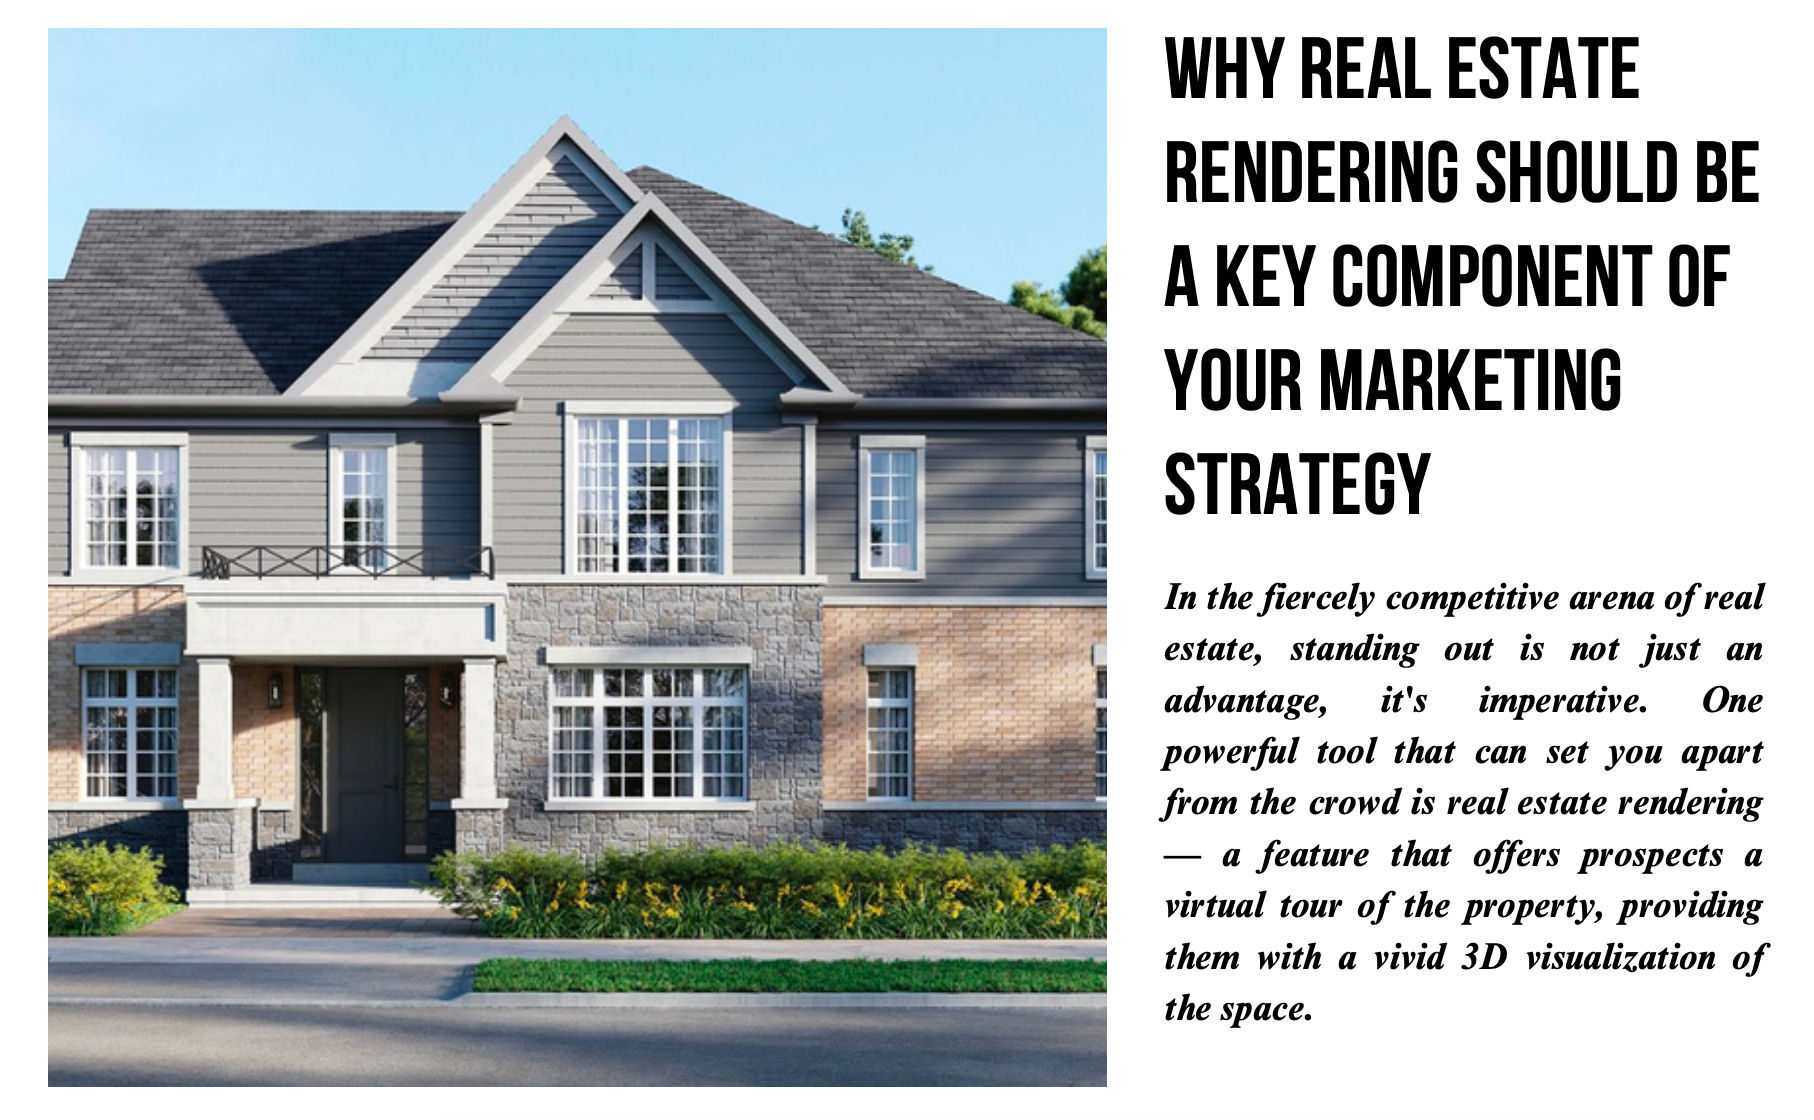 Why real estate rendering should be a key component of your marketing strategy